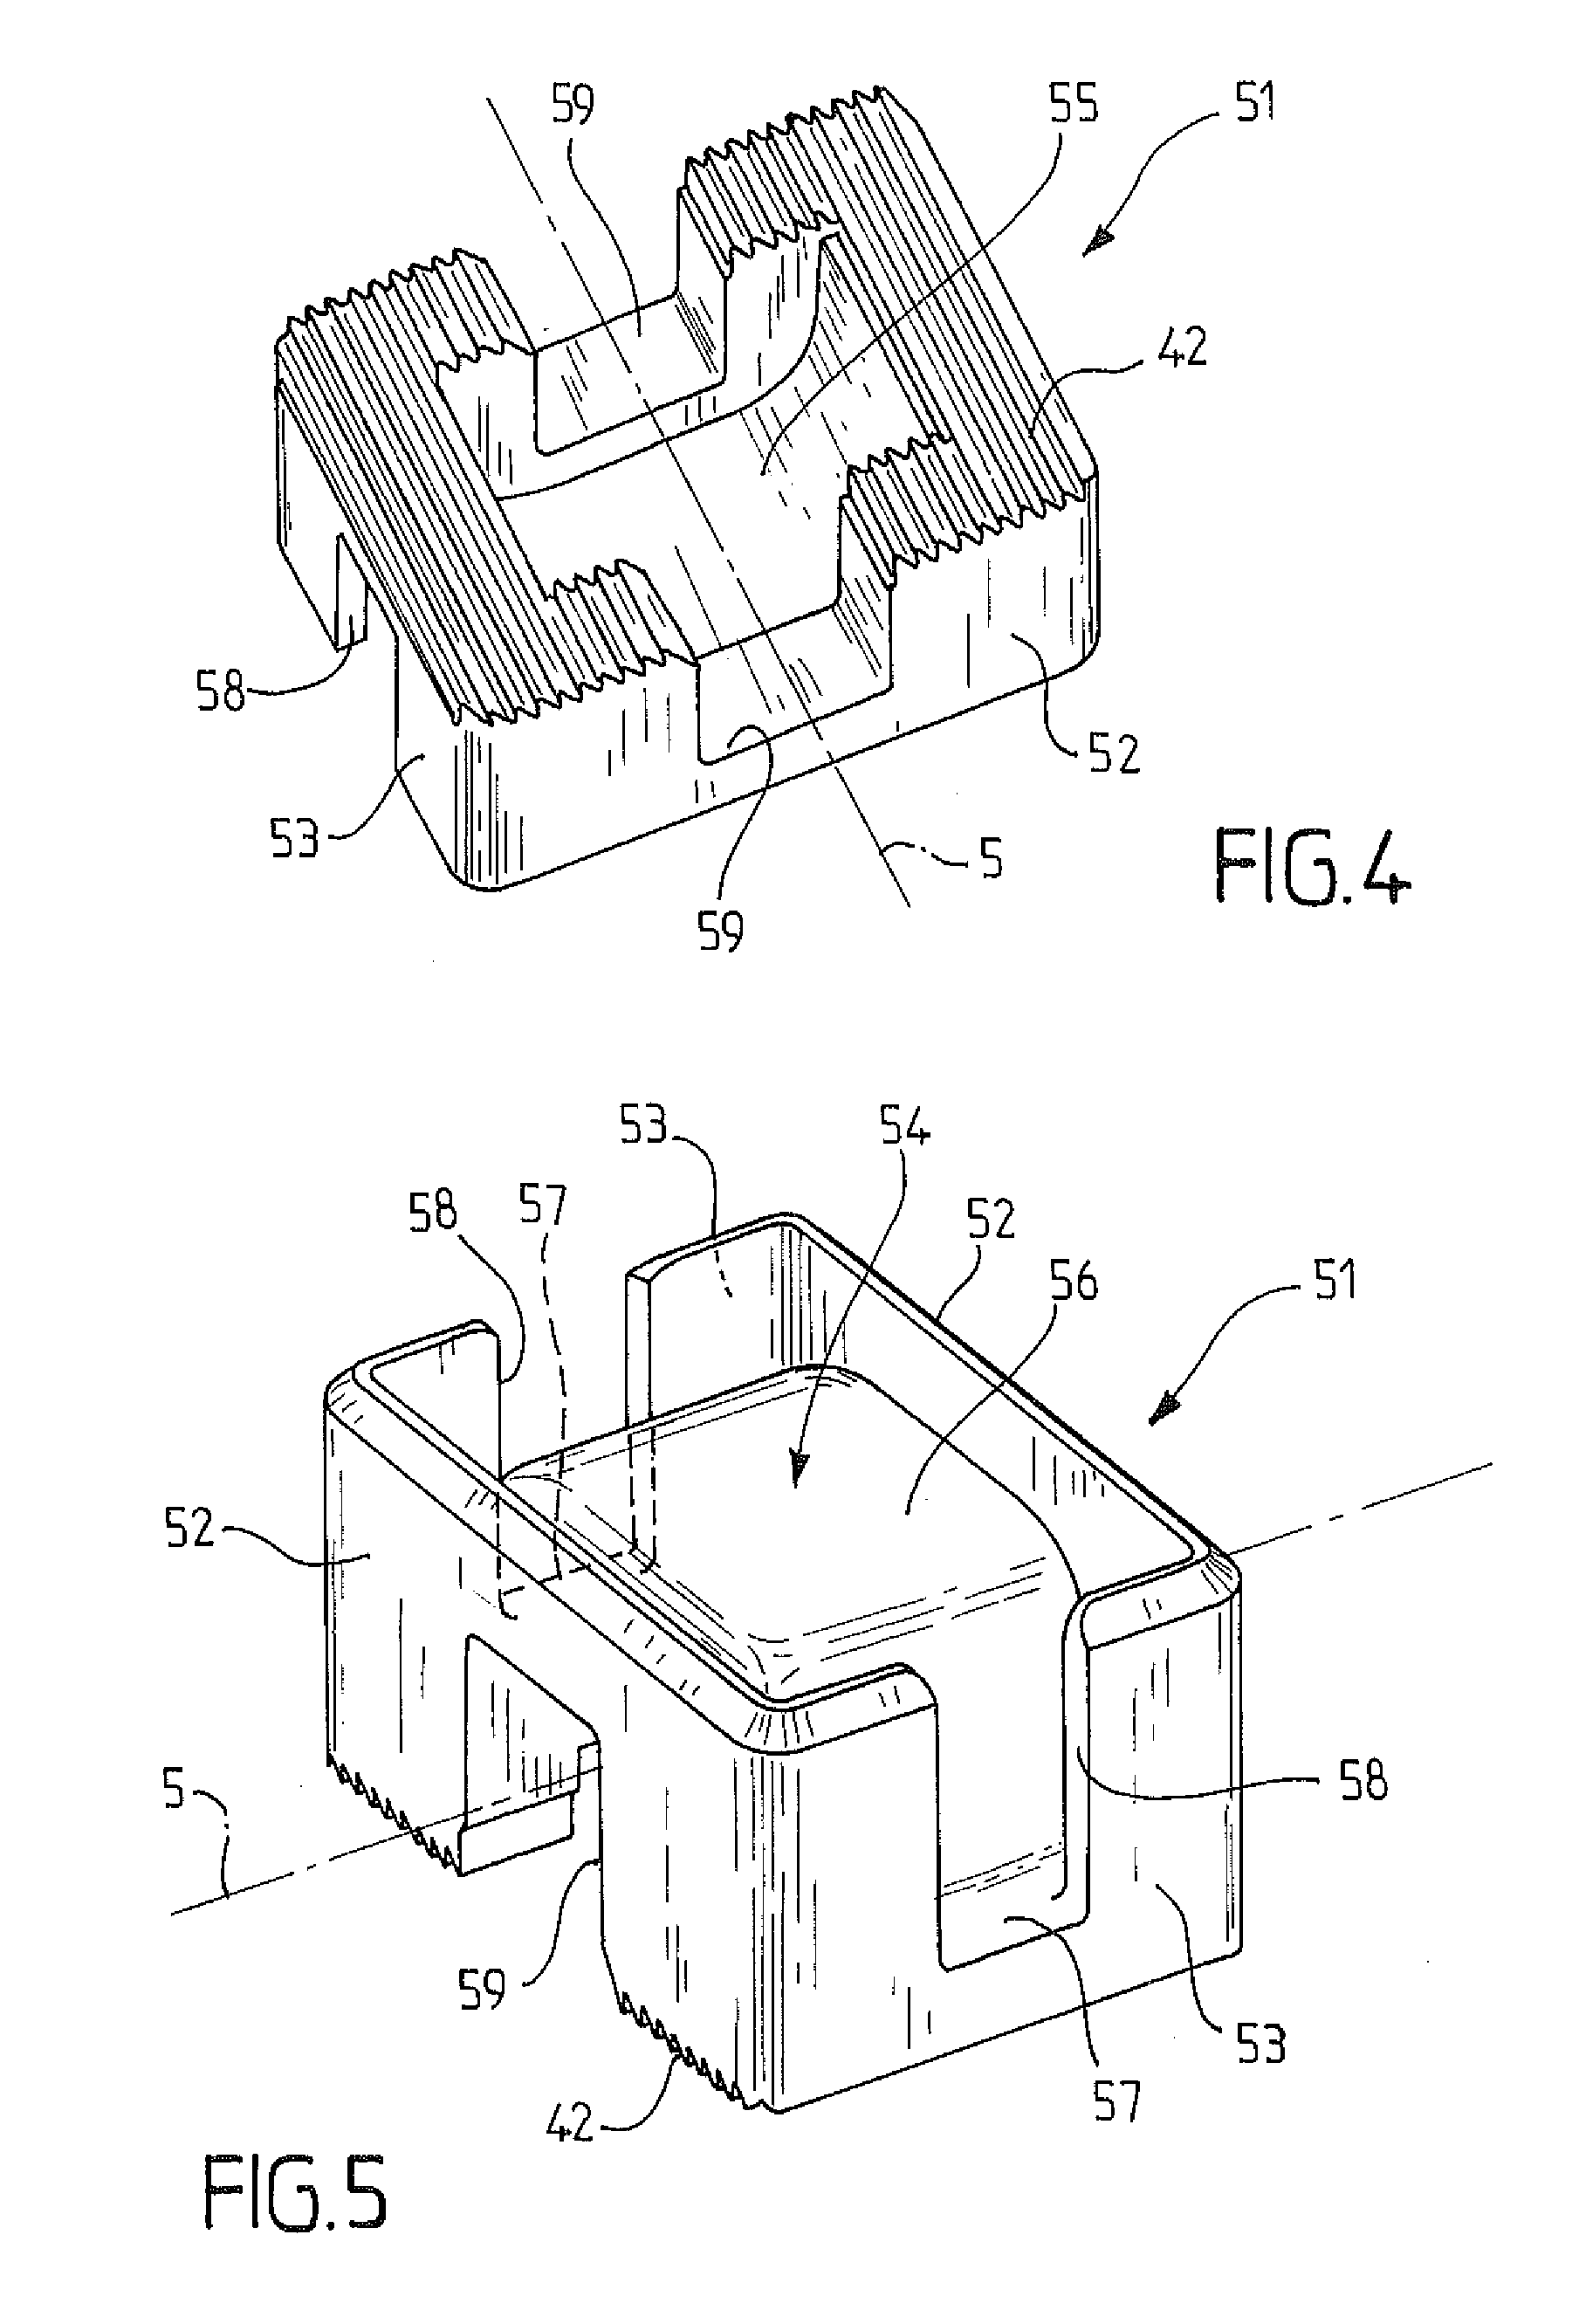 Energy absorption position-keeping device in an automotive vehicle steering column